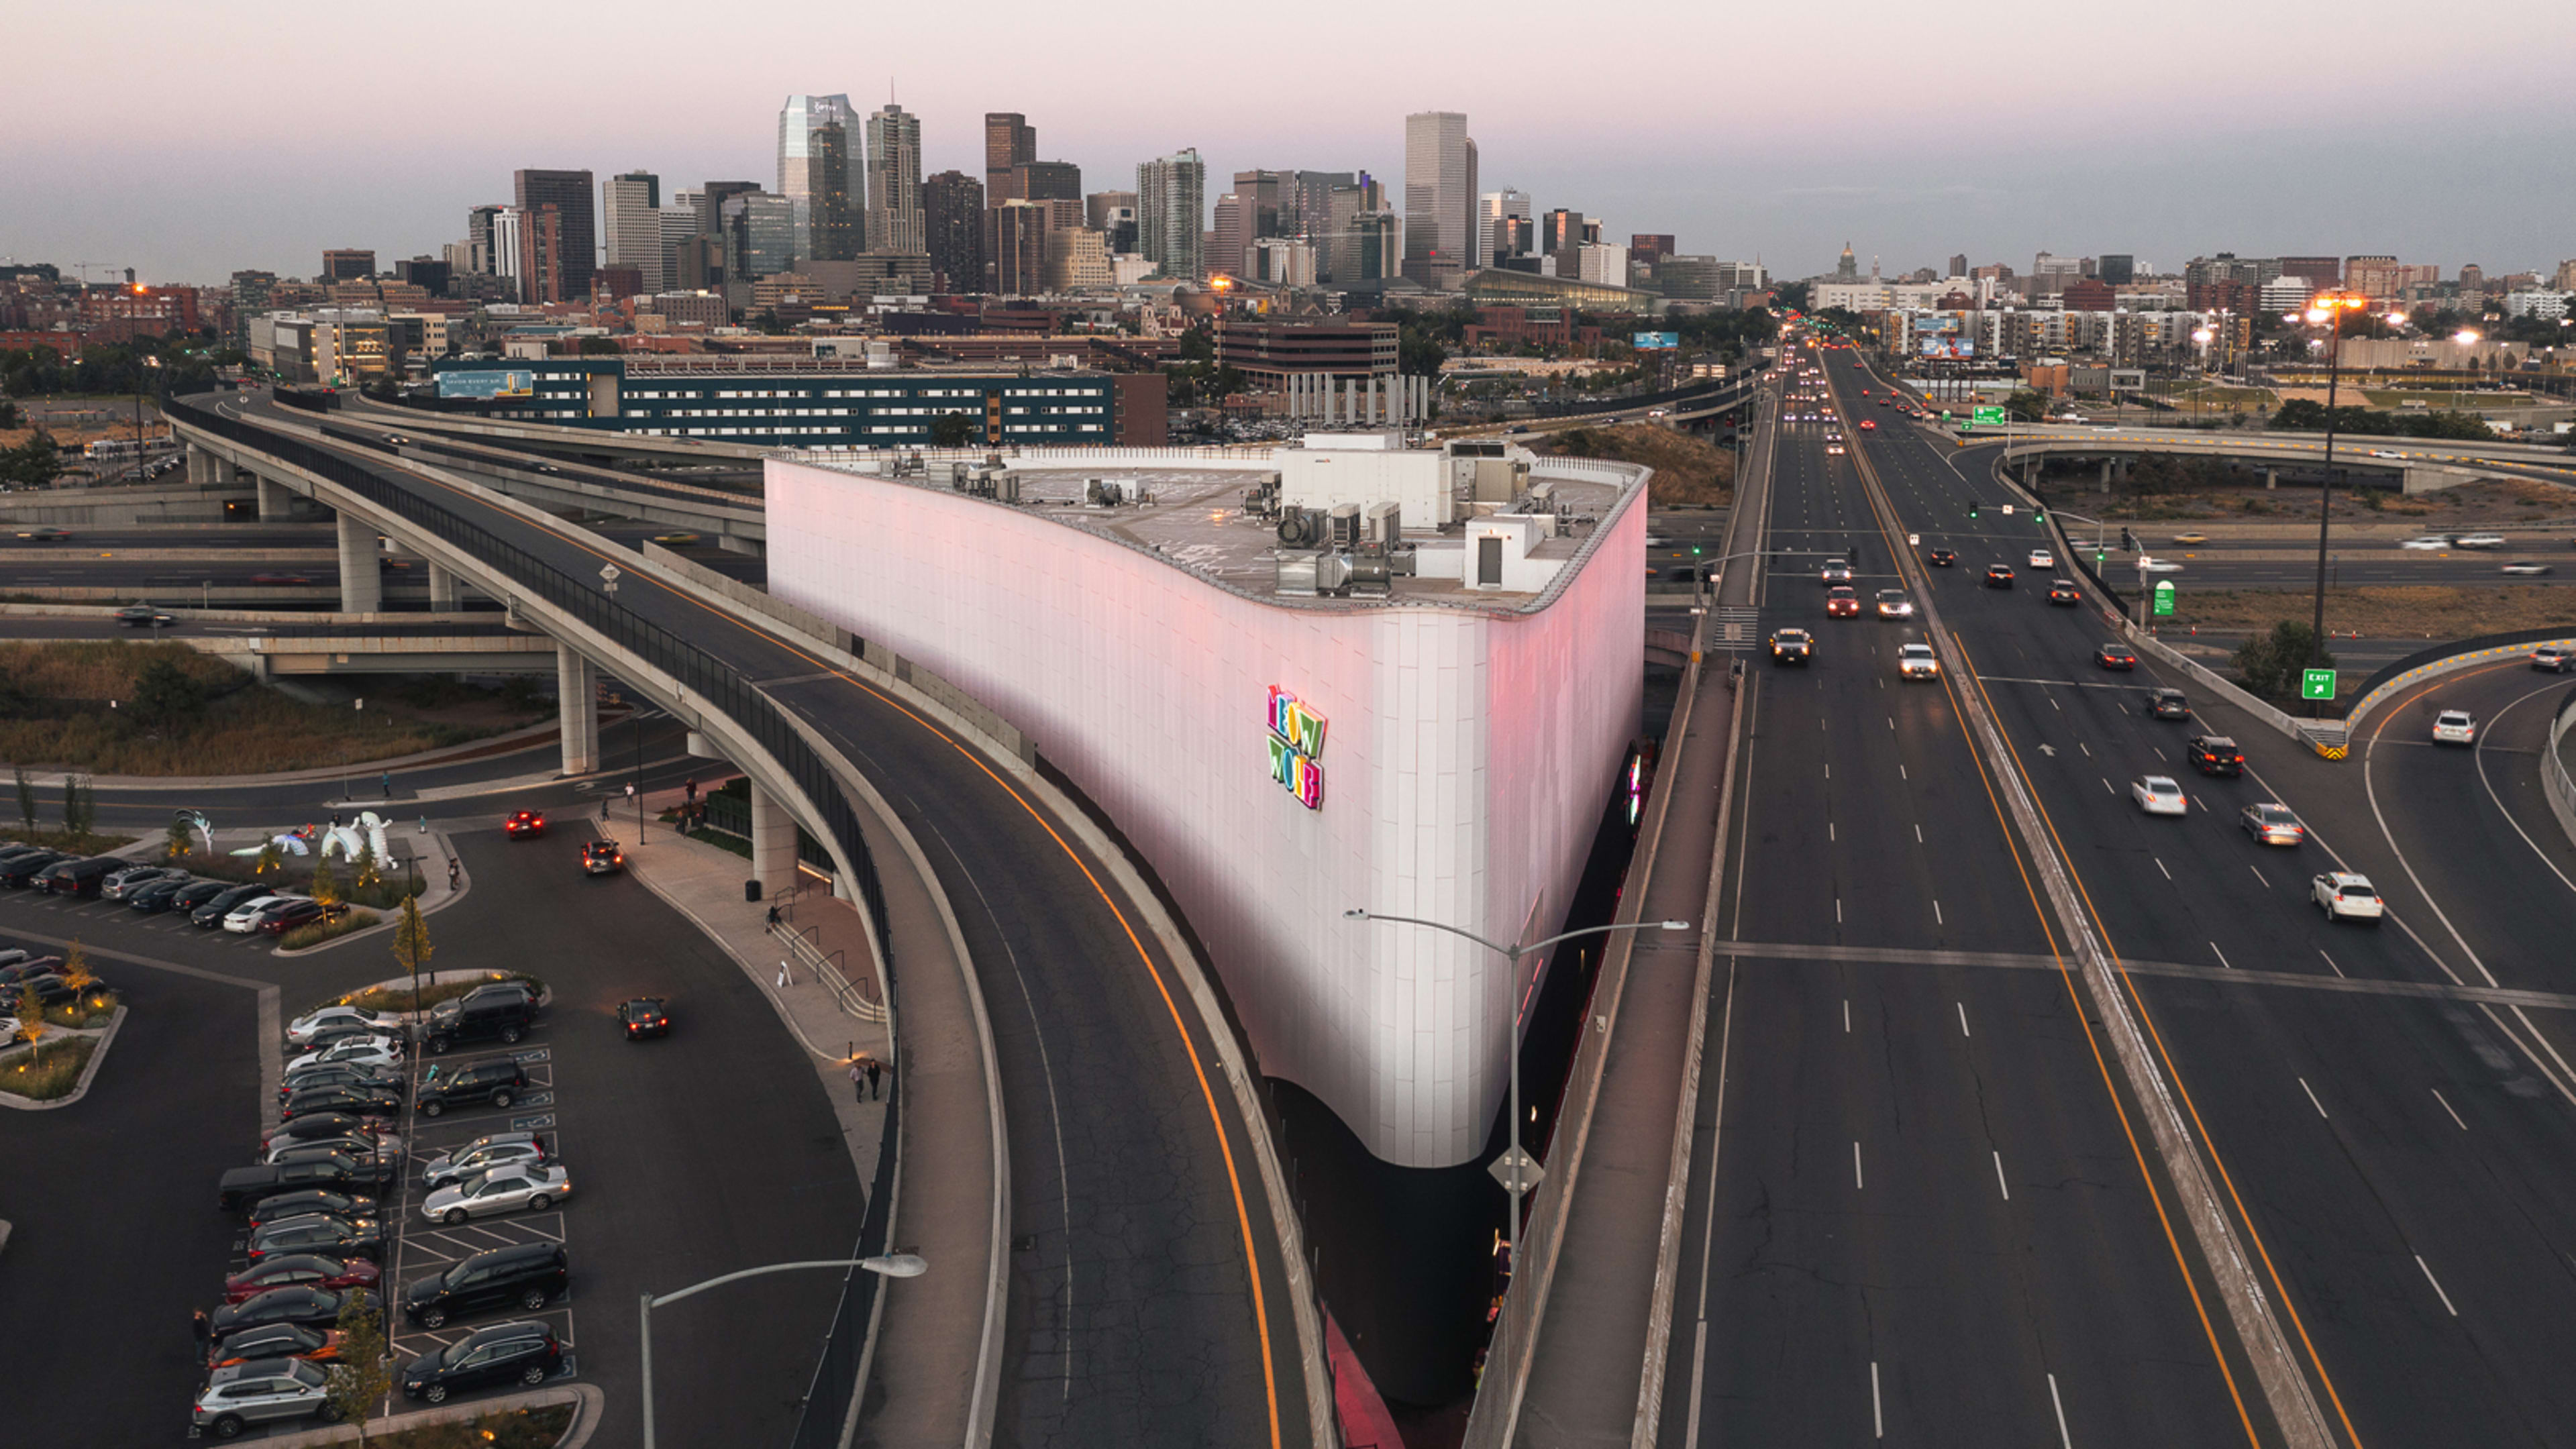 How a weird triangle between 3 highways was turned into a cutting-edge museum